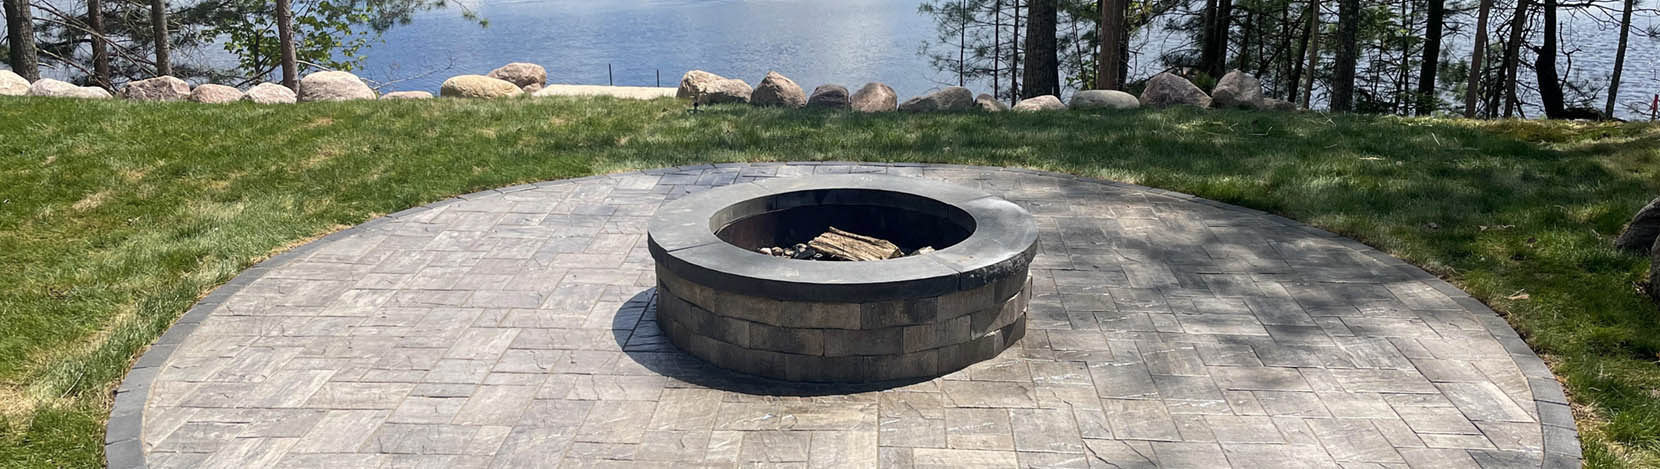 Northern Dreamscape patio with a fire pit on a beautiful Wisconsin property overlooking a rock wall to views of the lake.